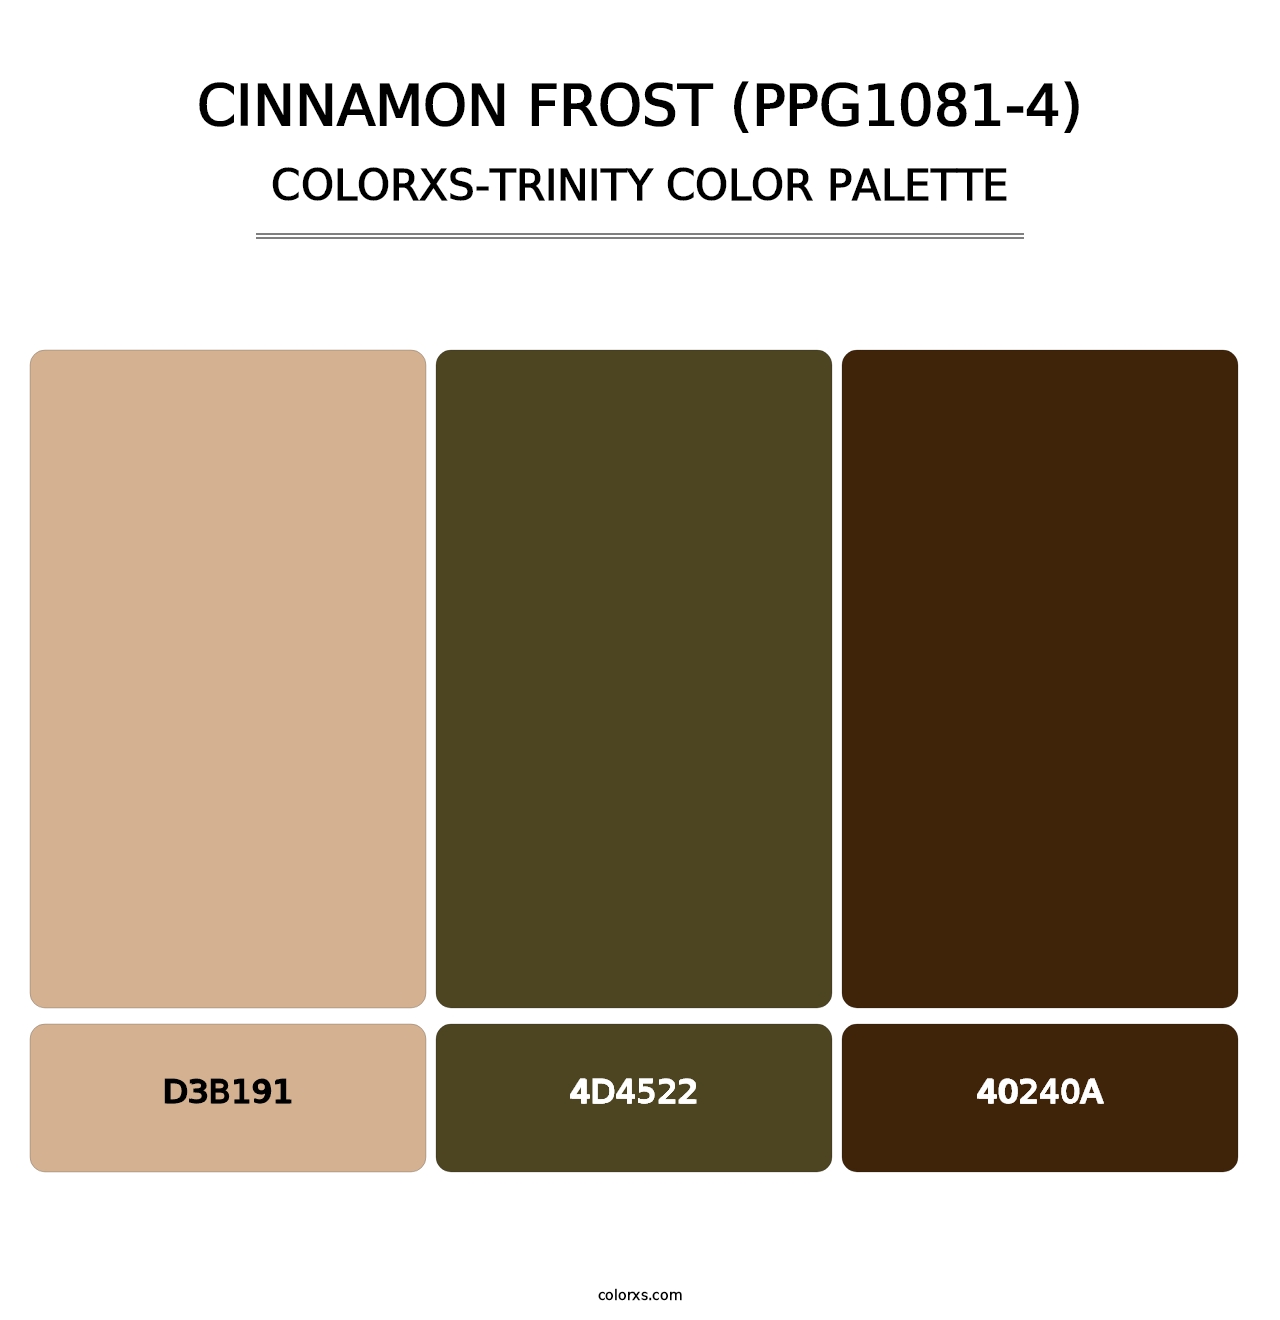 Cinnamon Frost (PPG1081-4) - Colorxs Trinity Palette